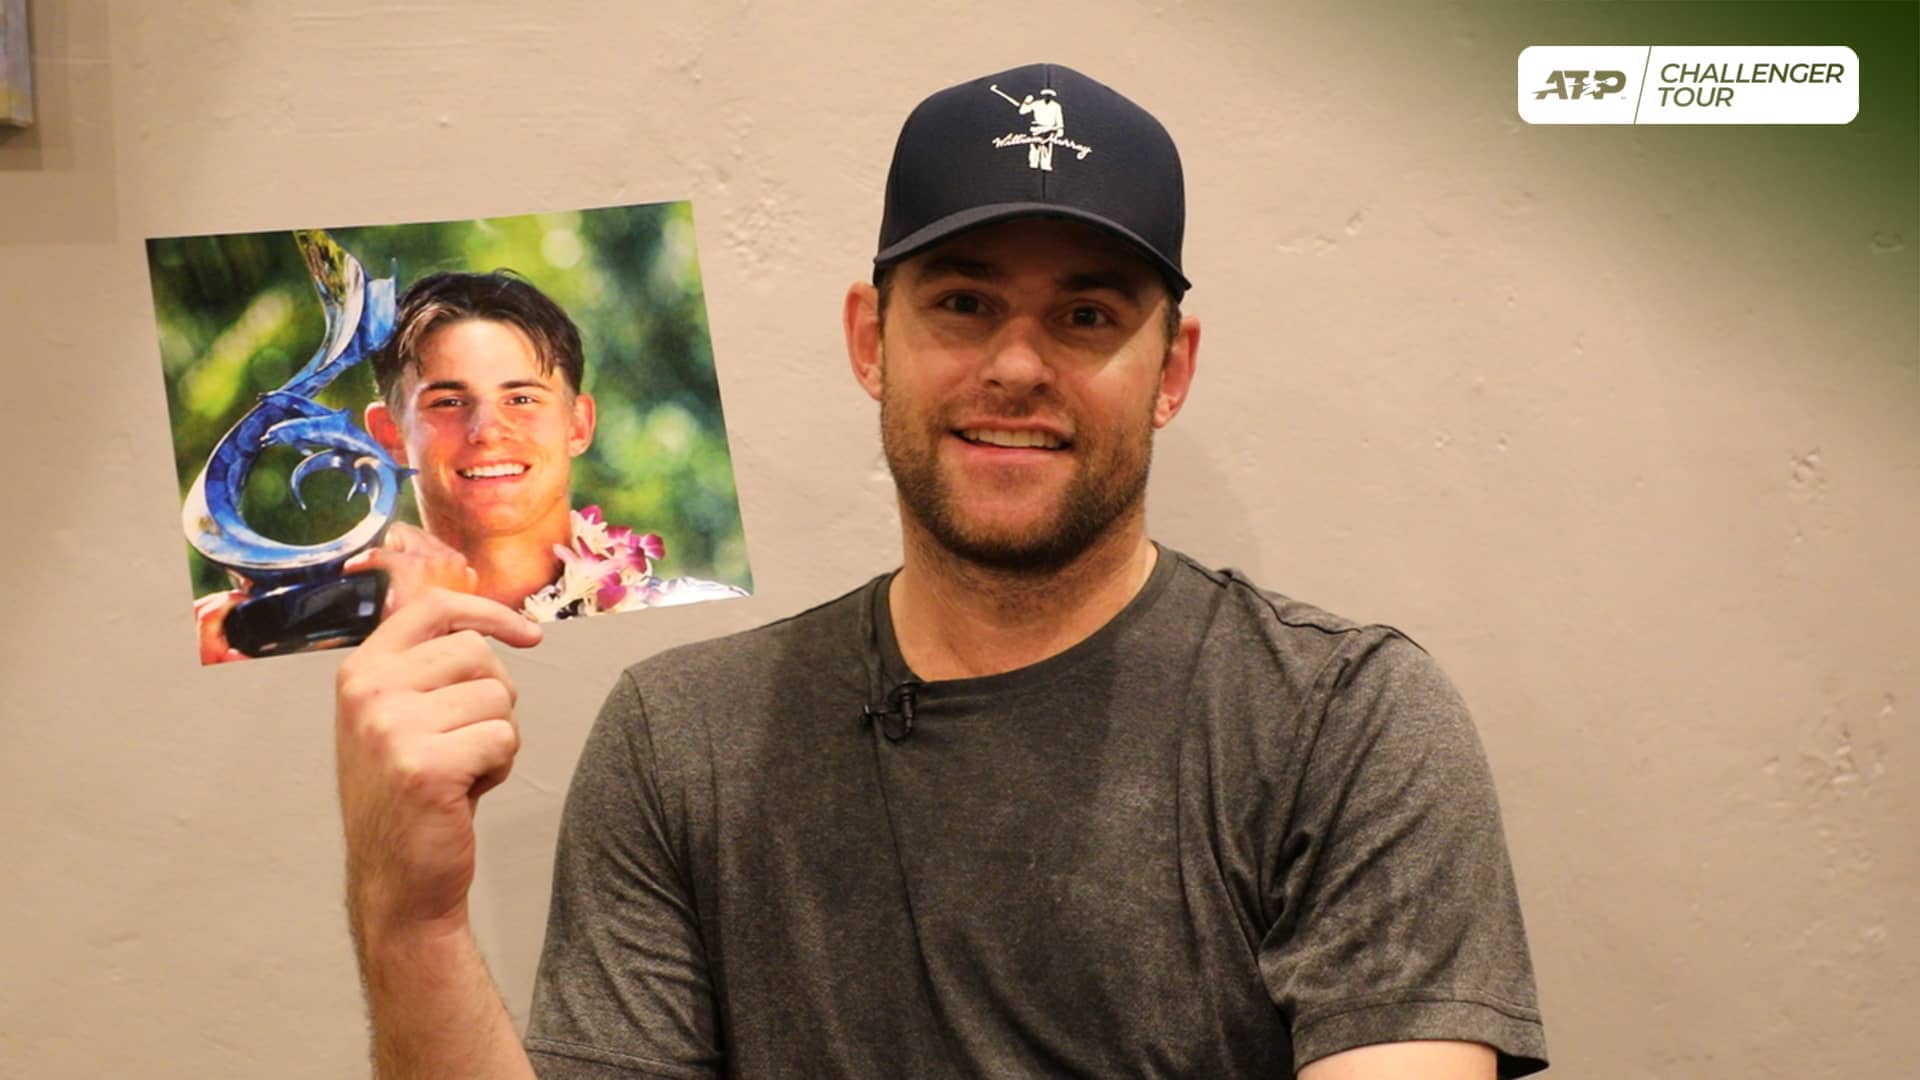 Andy Roddick won his third ATP Challenger title in Waikoloa, Hawaii, in 2001, marking his graduation to the ATP Tour.